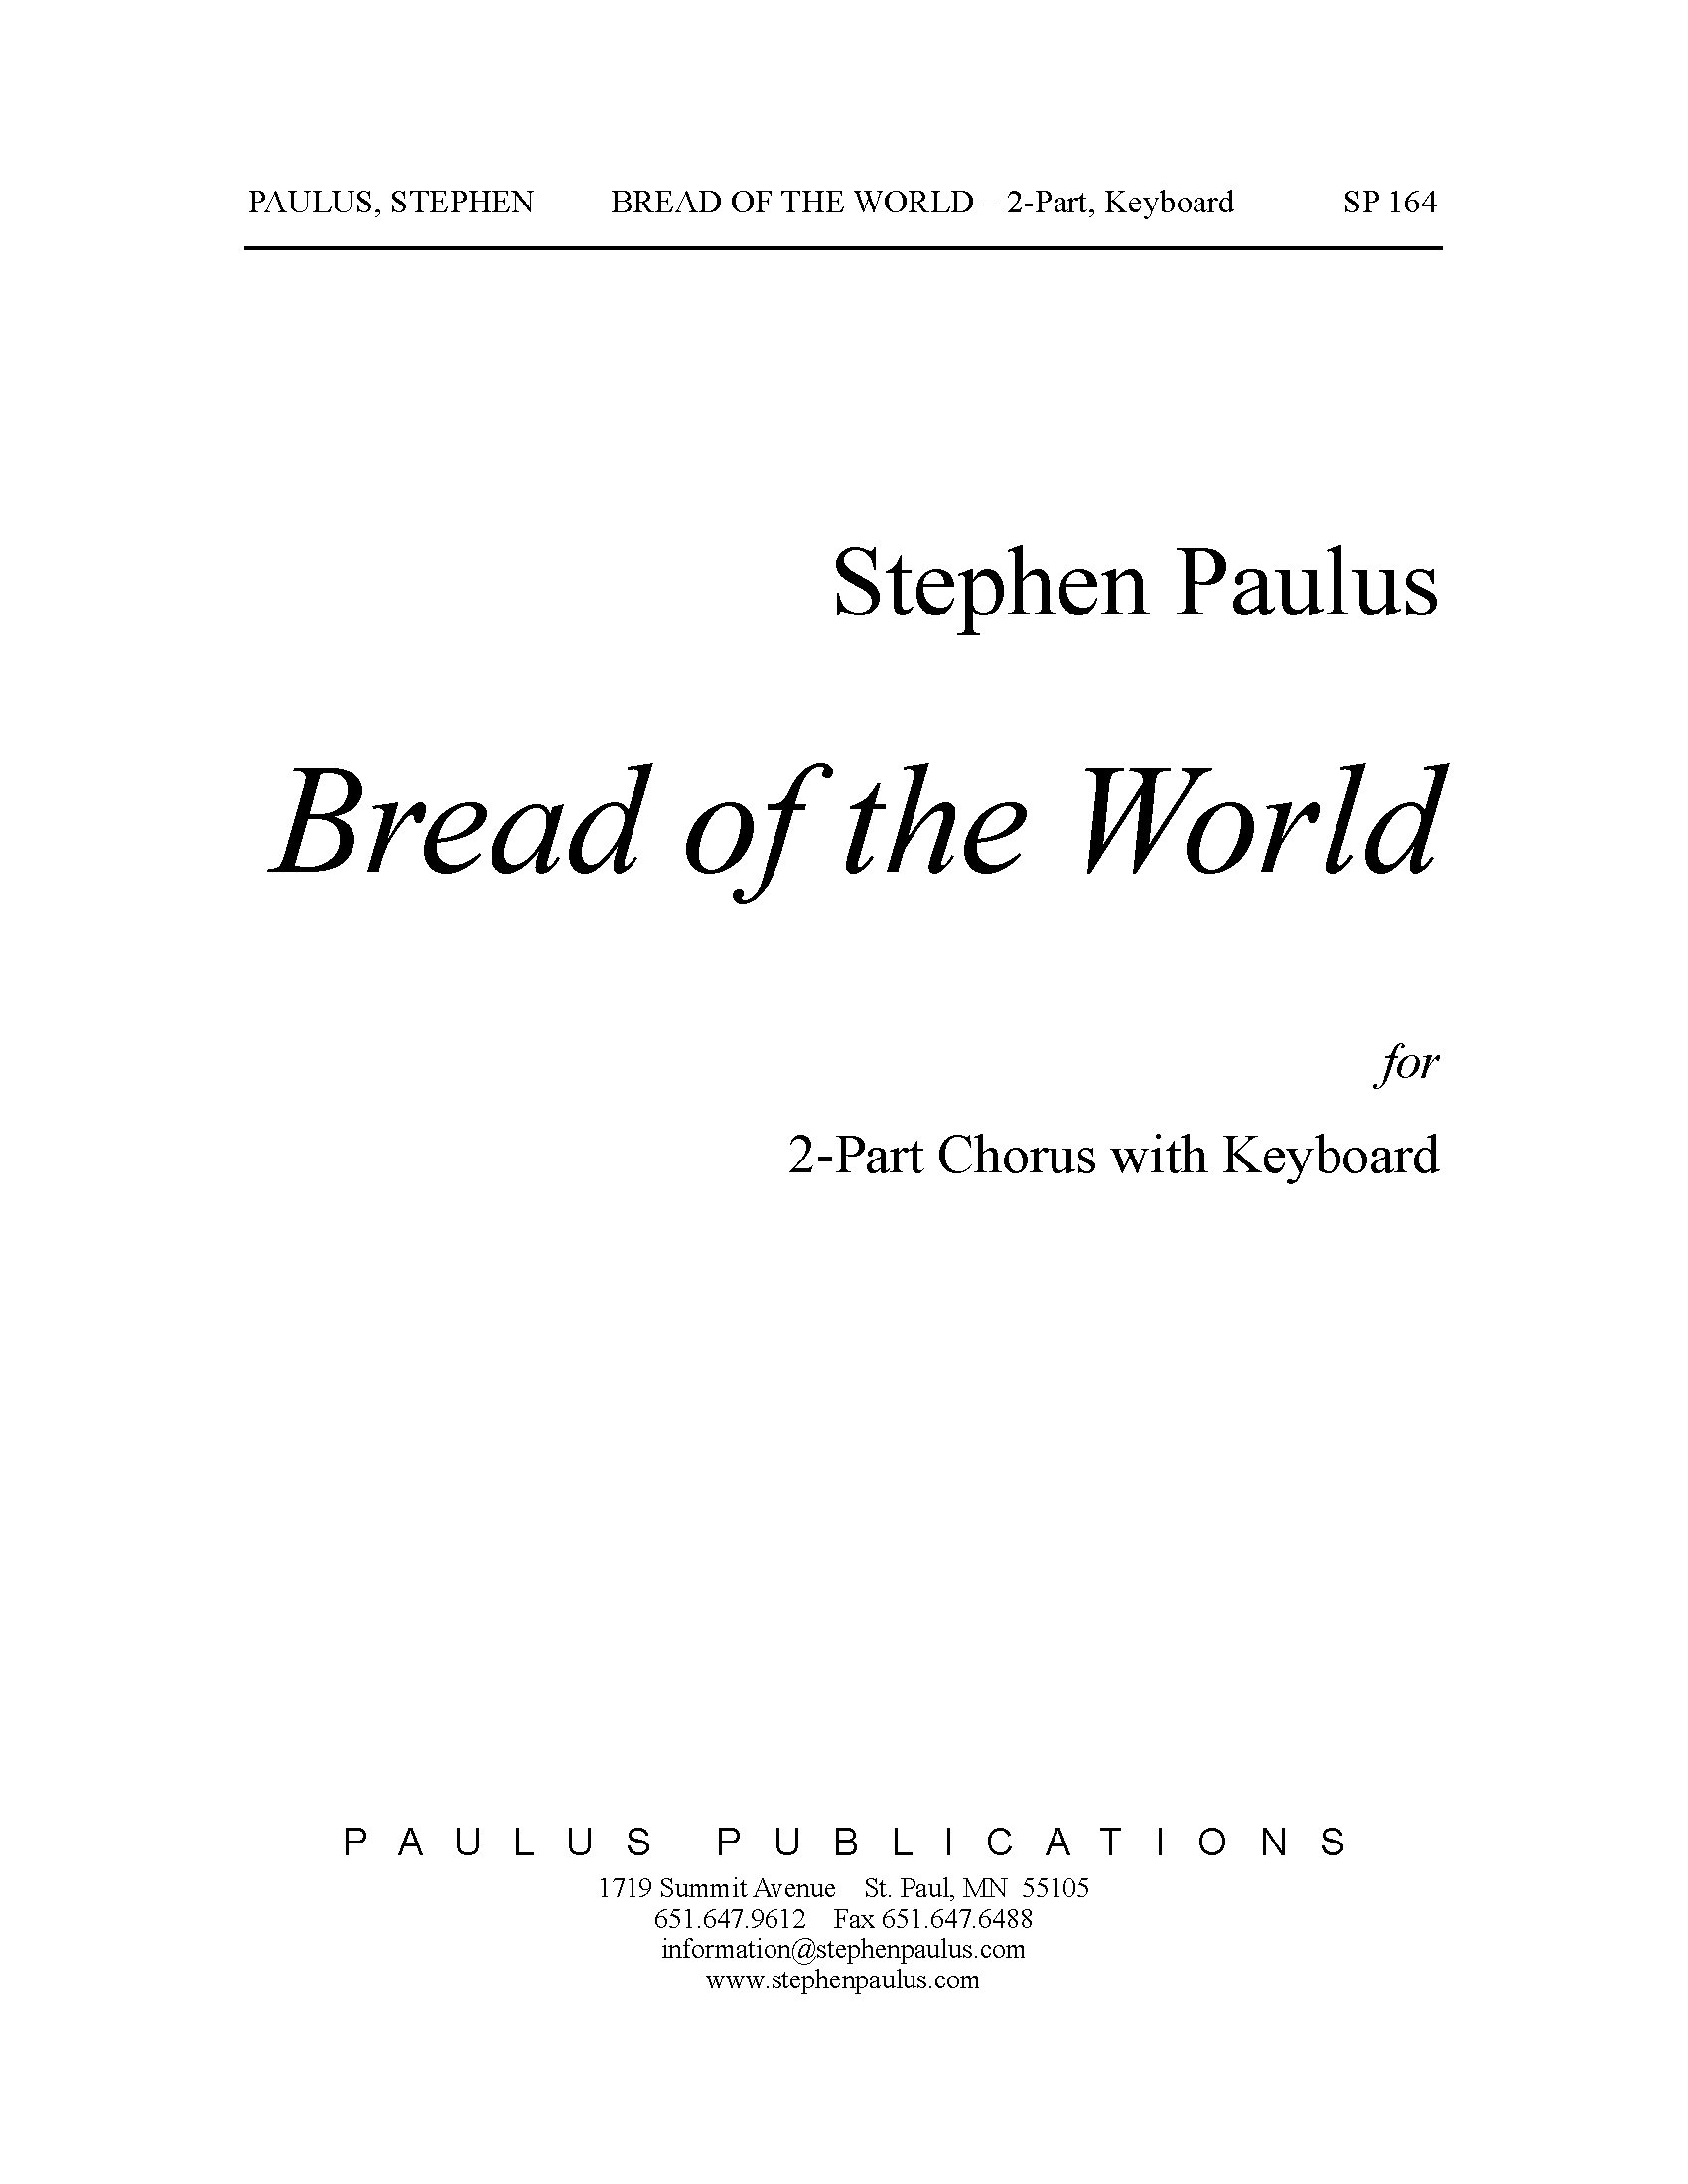 Bread of the World for 2-Part Chorus (any voicing) & Keyboard